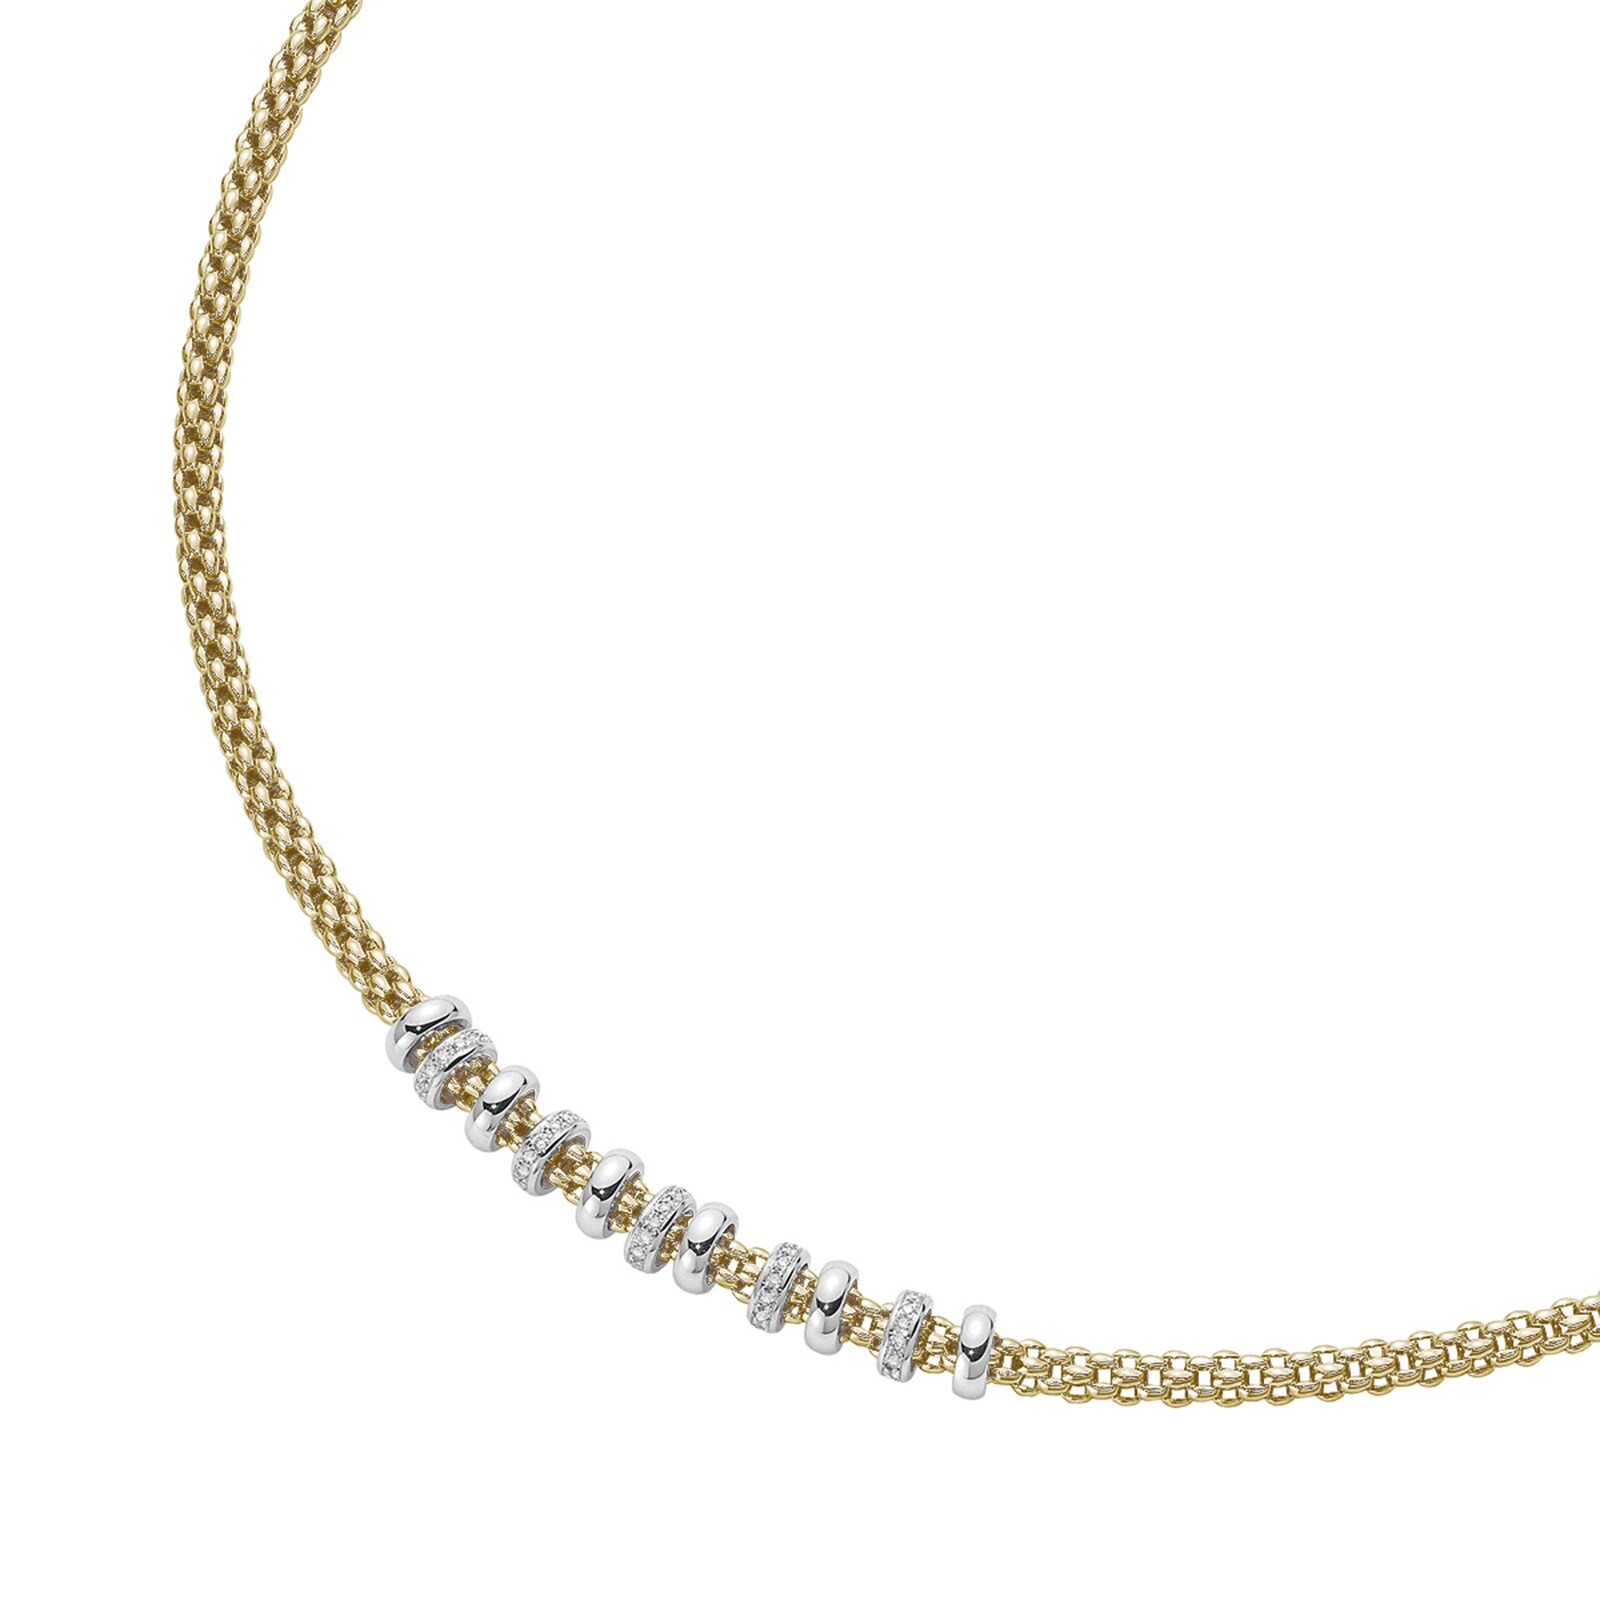 FOPE 18ct Yellow & White Gold Flex'it Solo Necklace 622C BBR-YG ...